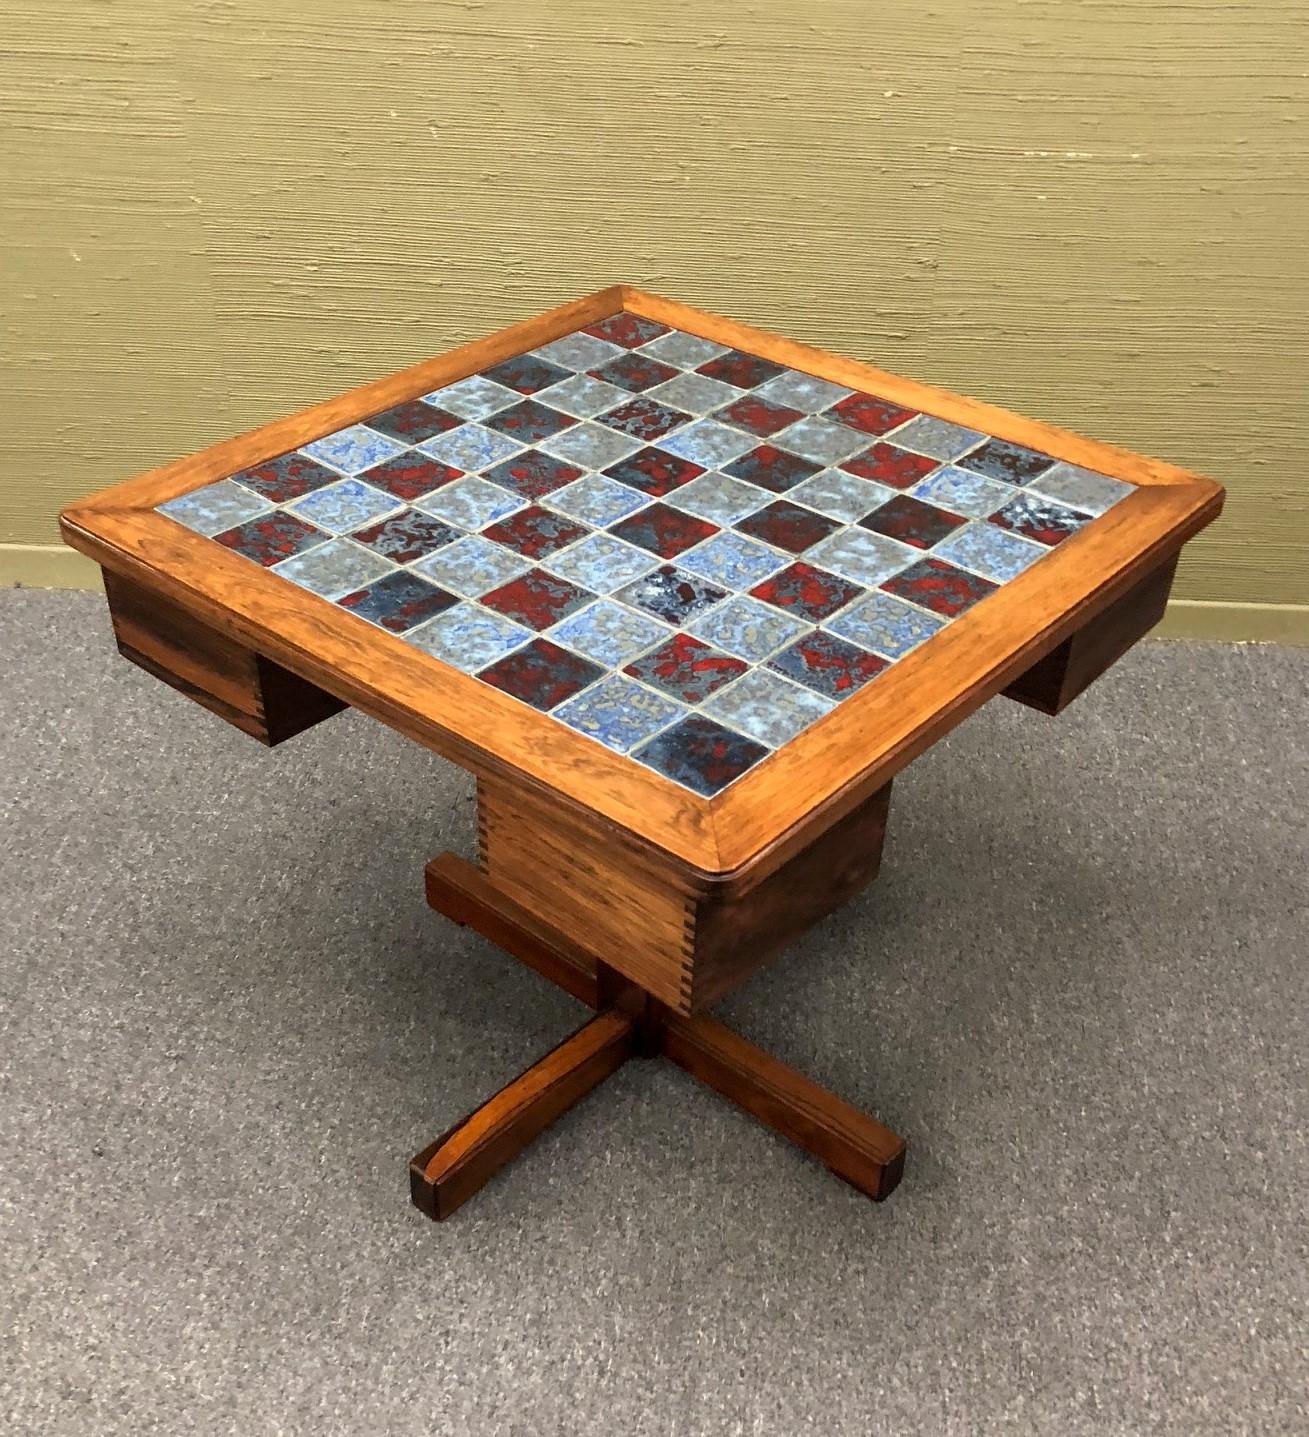 Gorgeous and rare Danish rosewood chess table with blue and cabernet colored inset ceramic tiles by Mogens Lund, circa 1960s. The whimsical original ceramic chess pieces (32 in total) can be stored in four swivel drawers that store under the table.